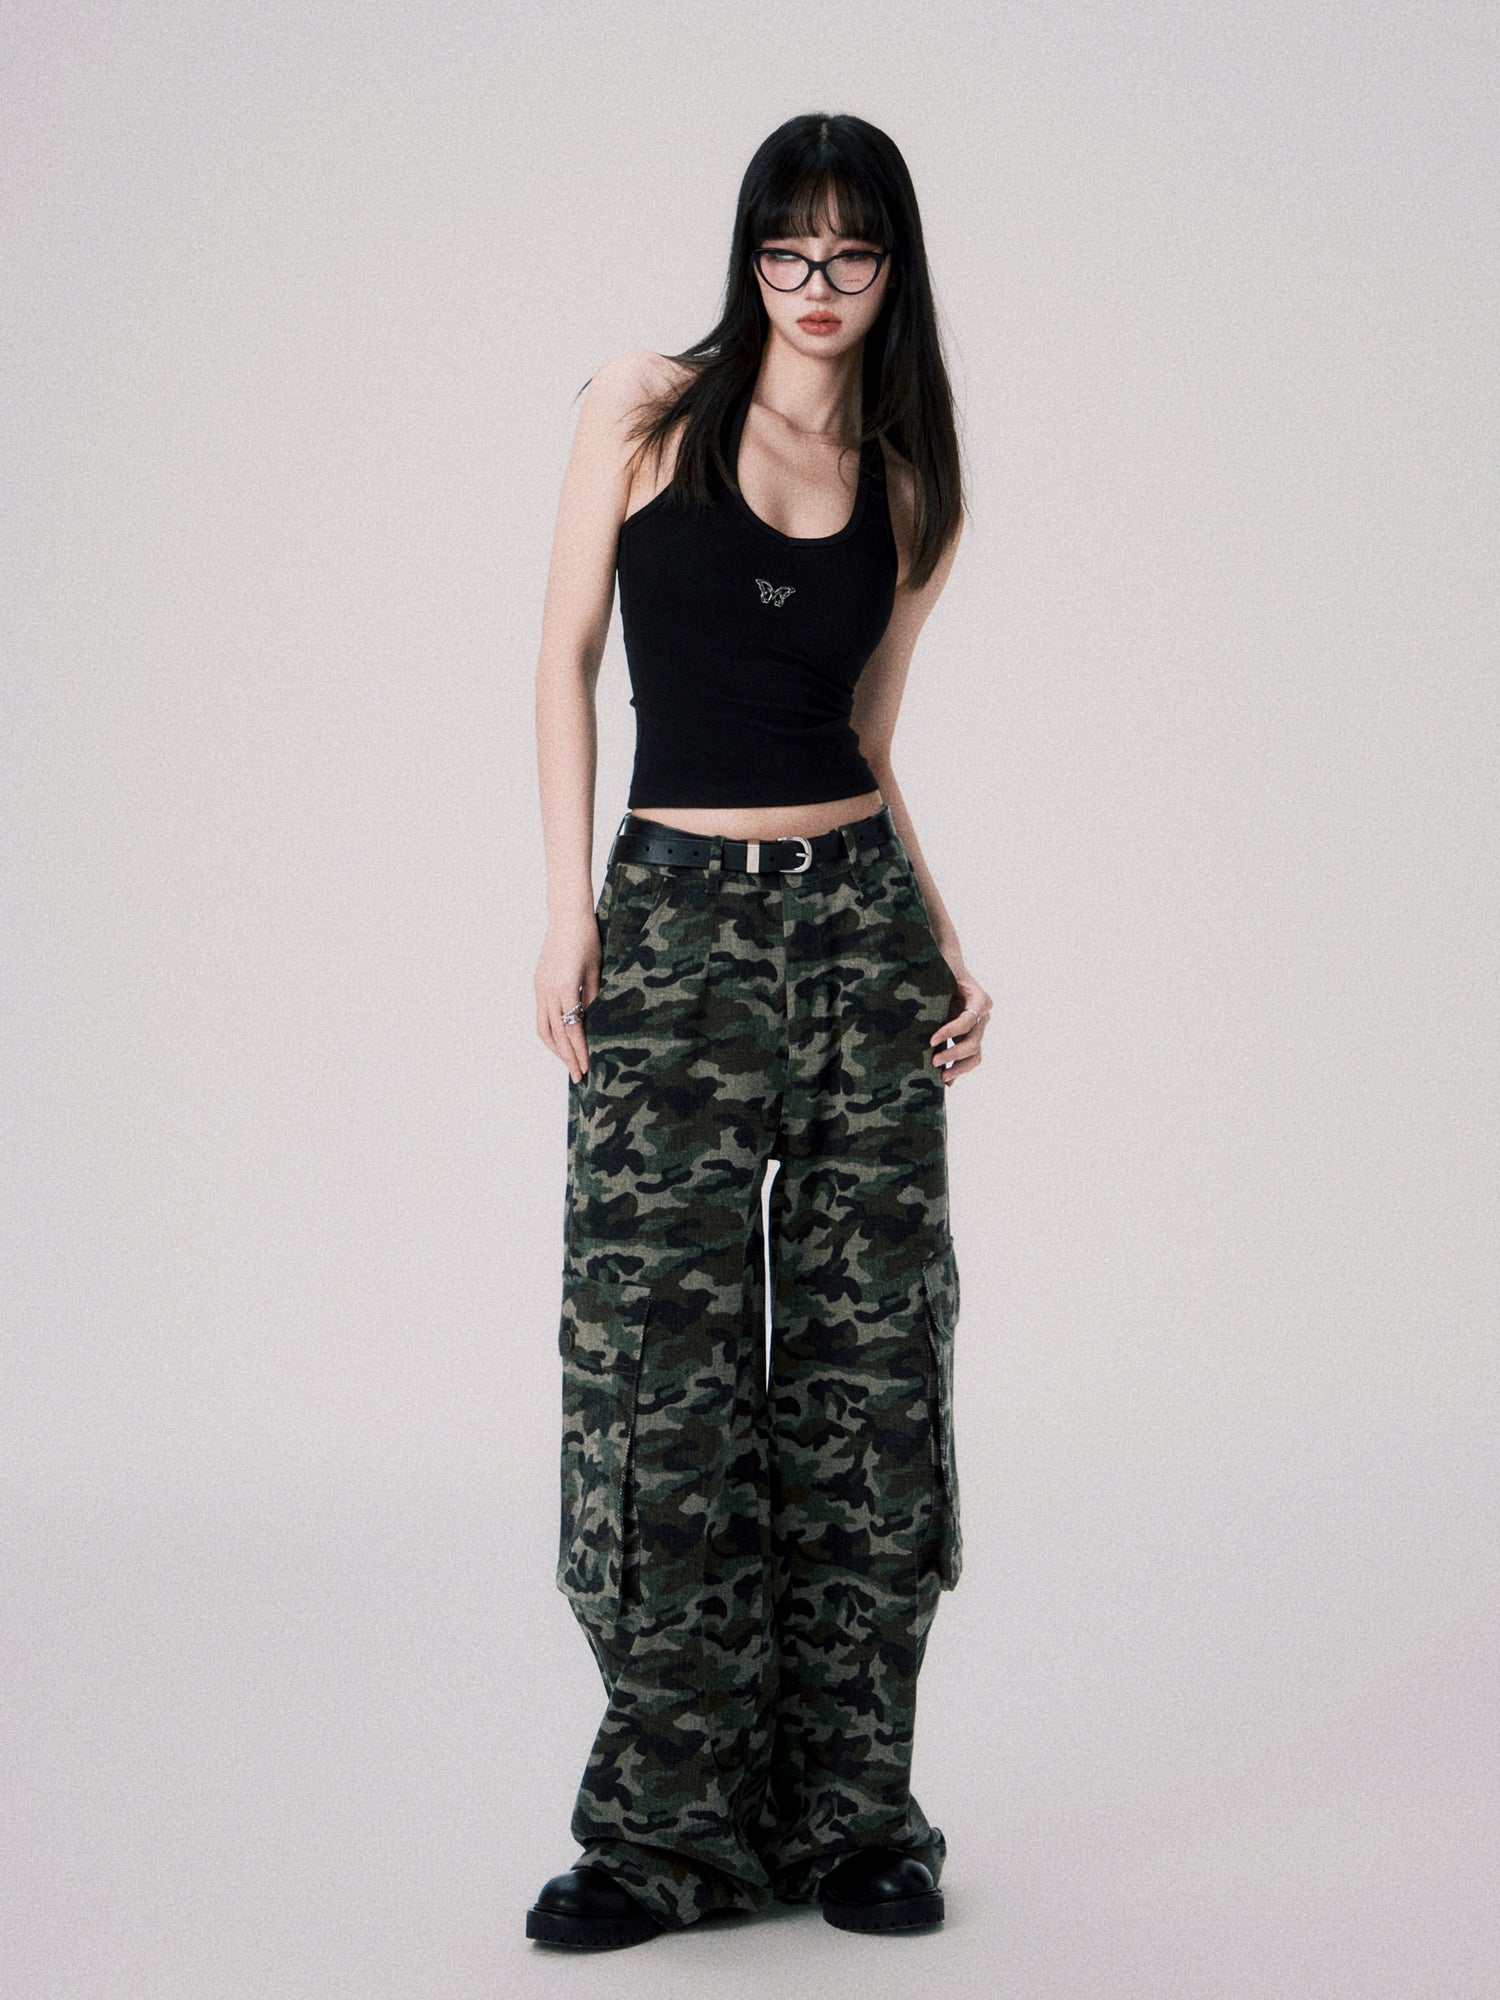 Loose Camouflage Cargo Pants